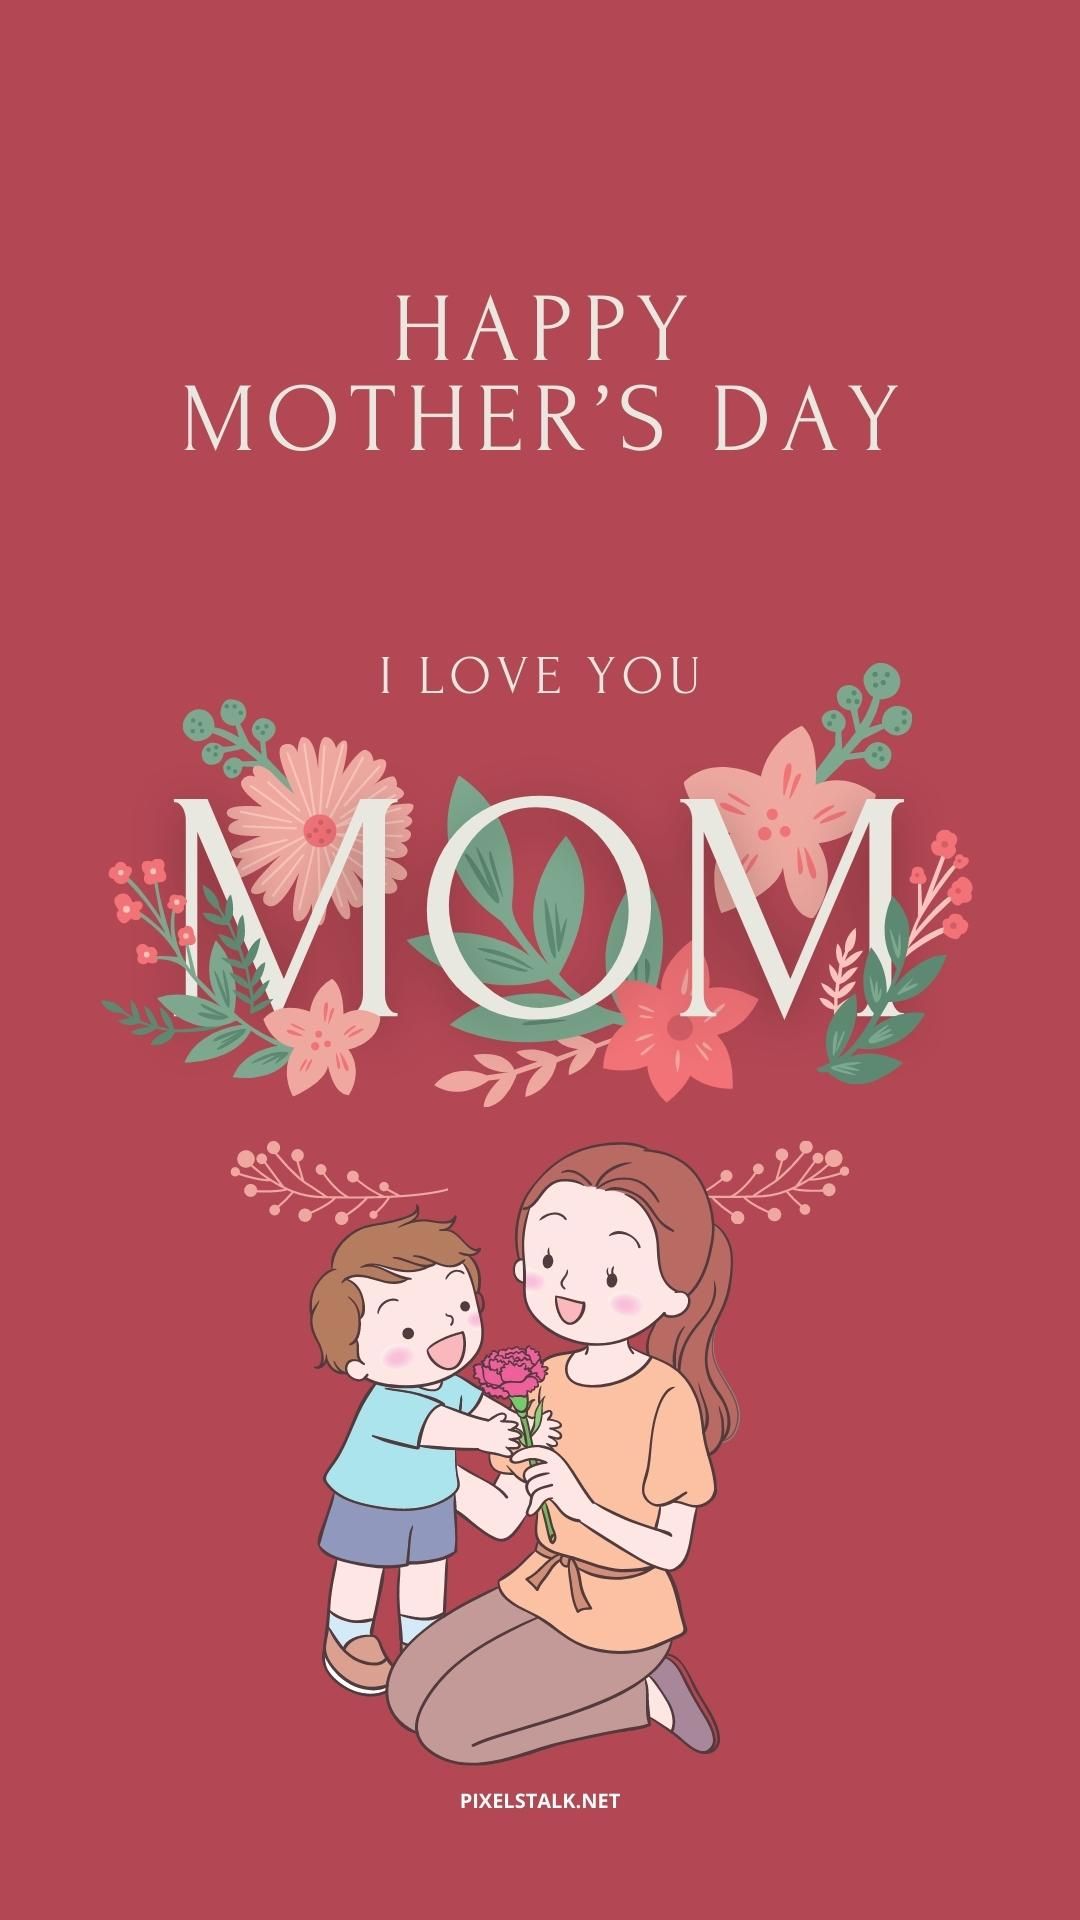 Mothers Day Wallpapers - Top 30 Best Mothers Day Wallpapers Download